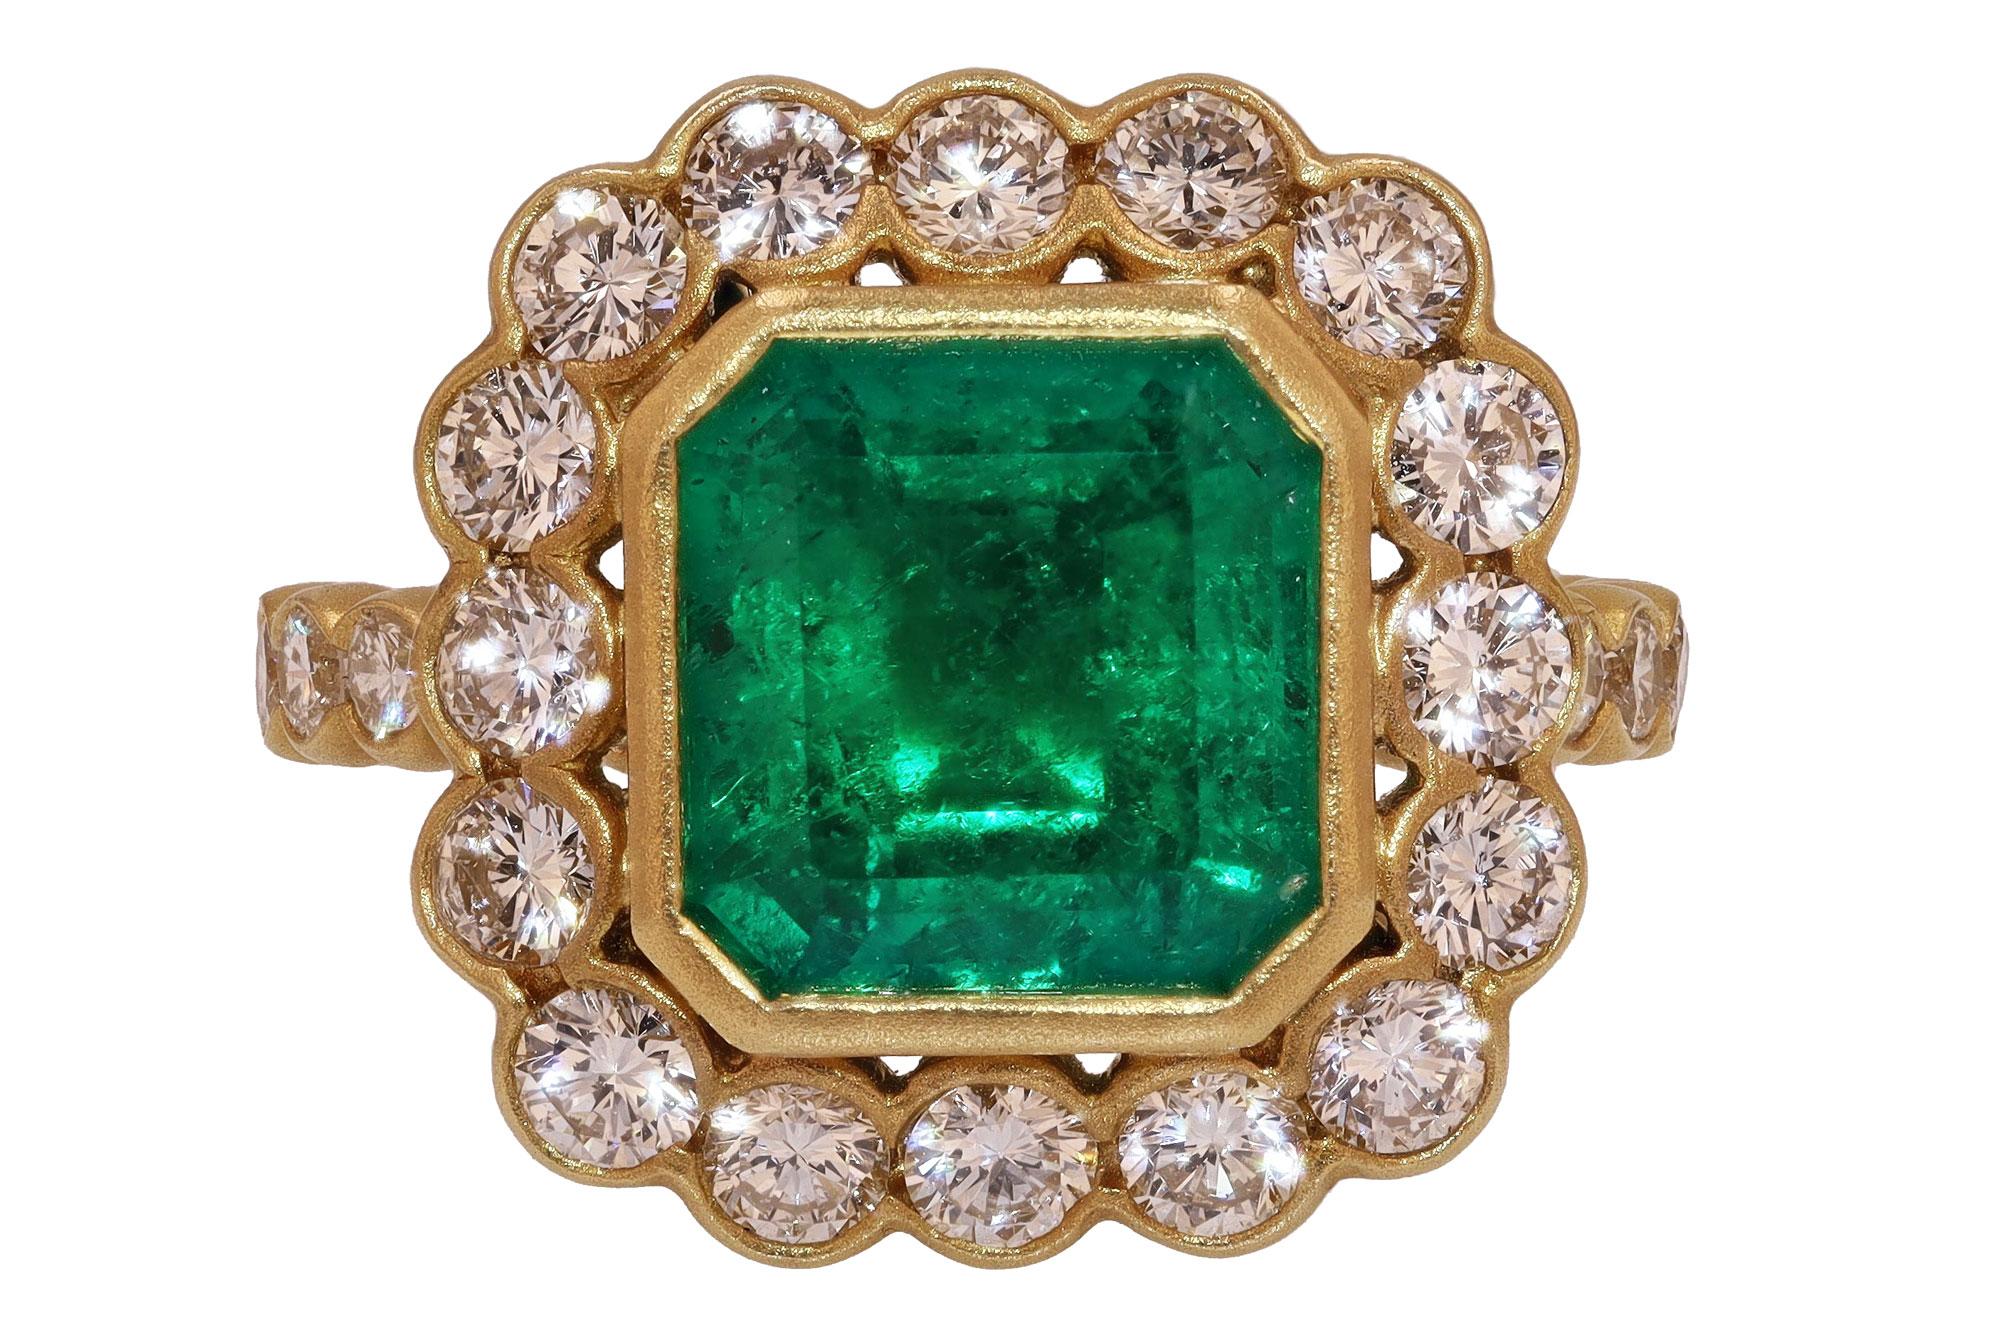 Hailing from the famous Muzo mine, we present this fine Colombian emerald and diamond halo engagement ring. Centered by an exceptional gem with a glowing, lustrous, intense green. The octagon cut weighs 2.75 carats set in a luxurious, buttery 18k